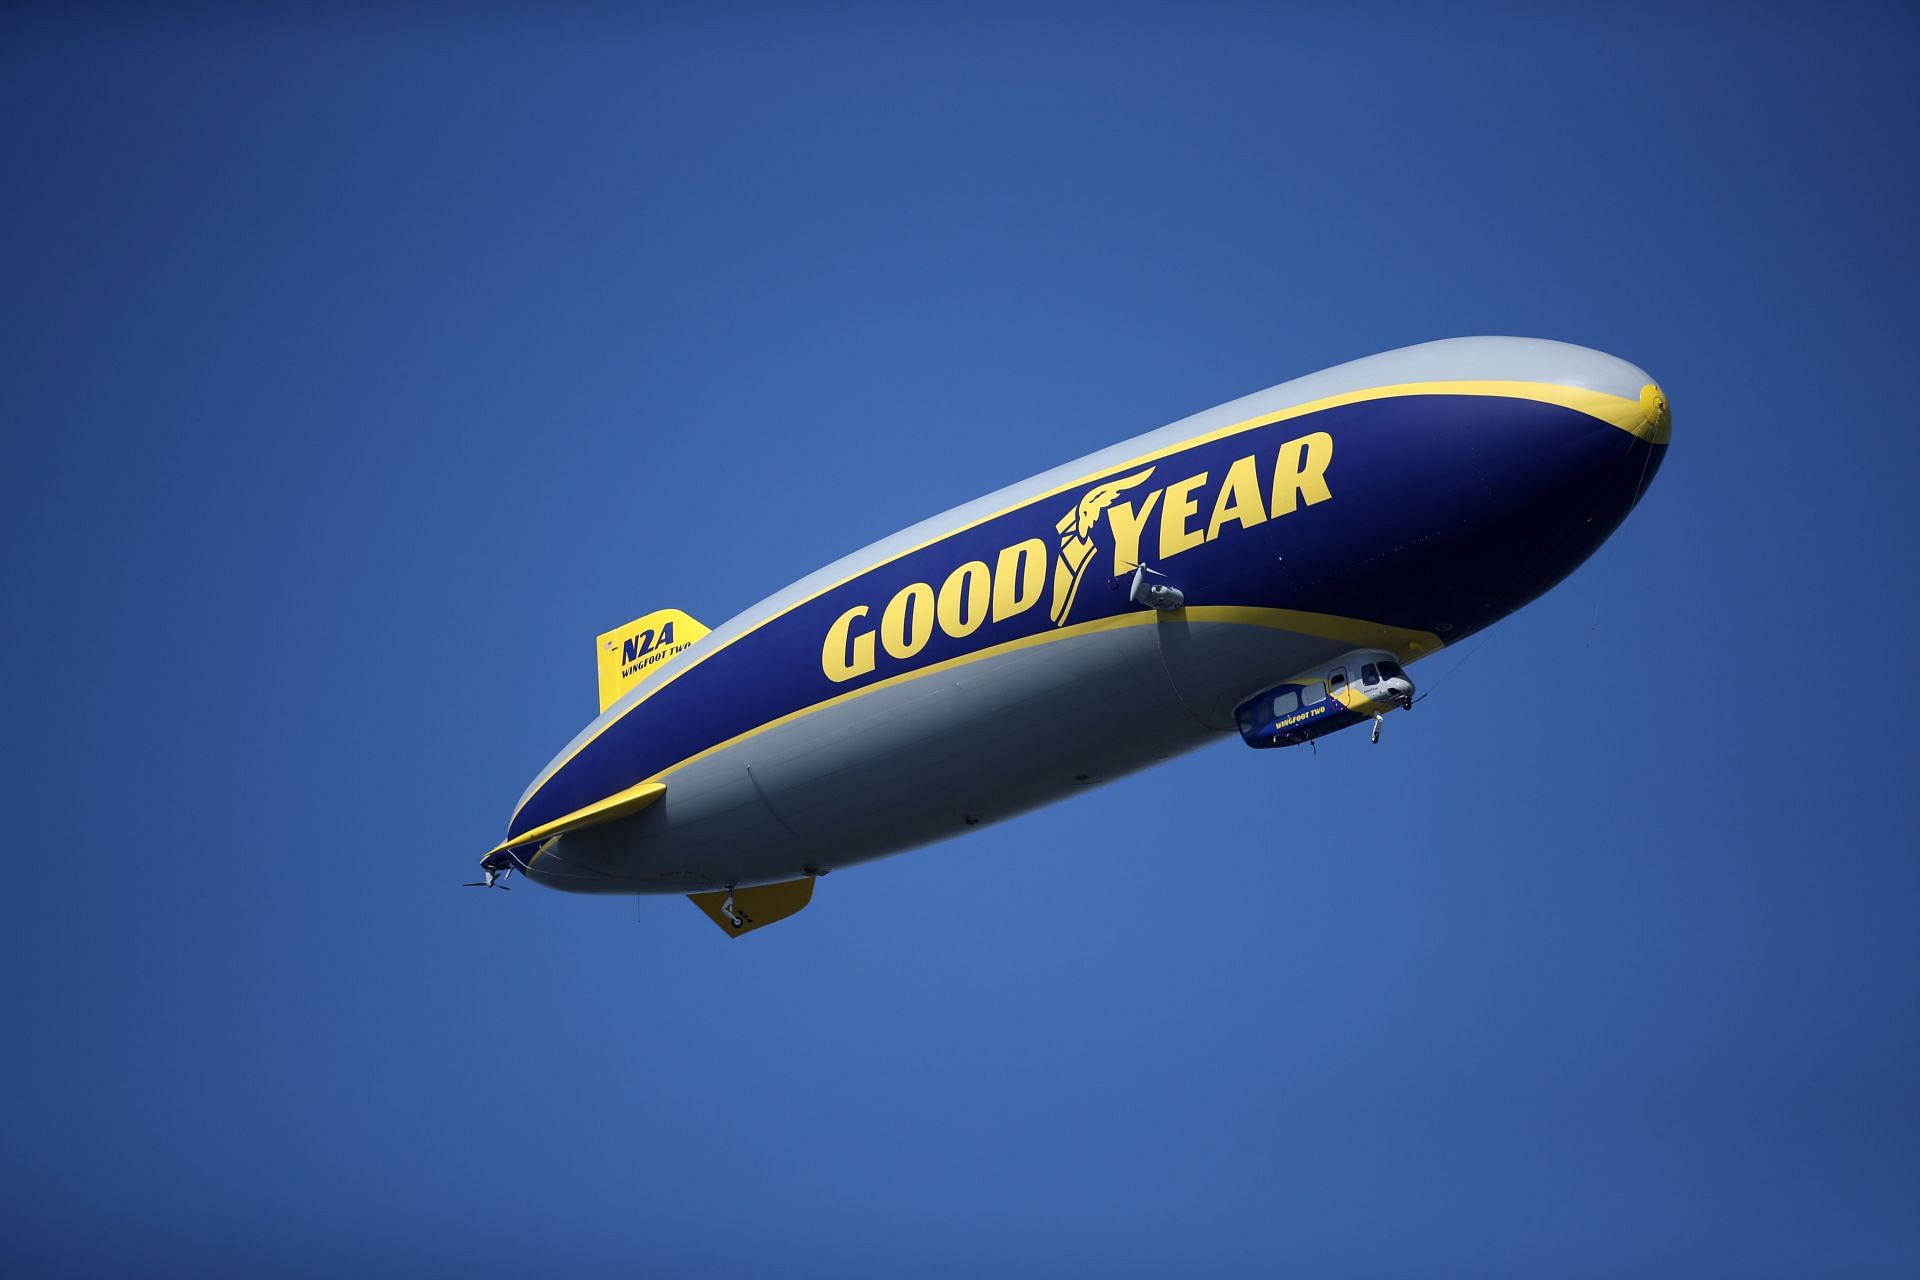 The Goodyear blimp flies overhead during the NASCAR Cup Series Goodyear 400 at Darlington Raceway. (Photo by Sean Gardner/Getty Images)